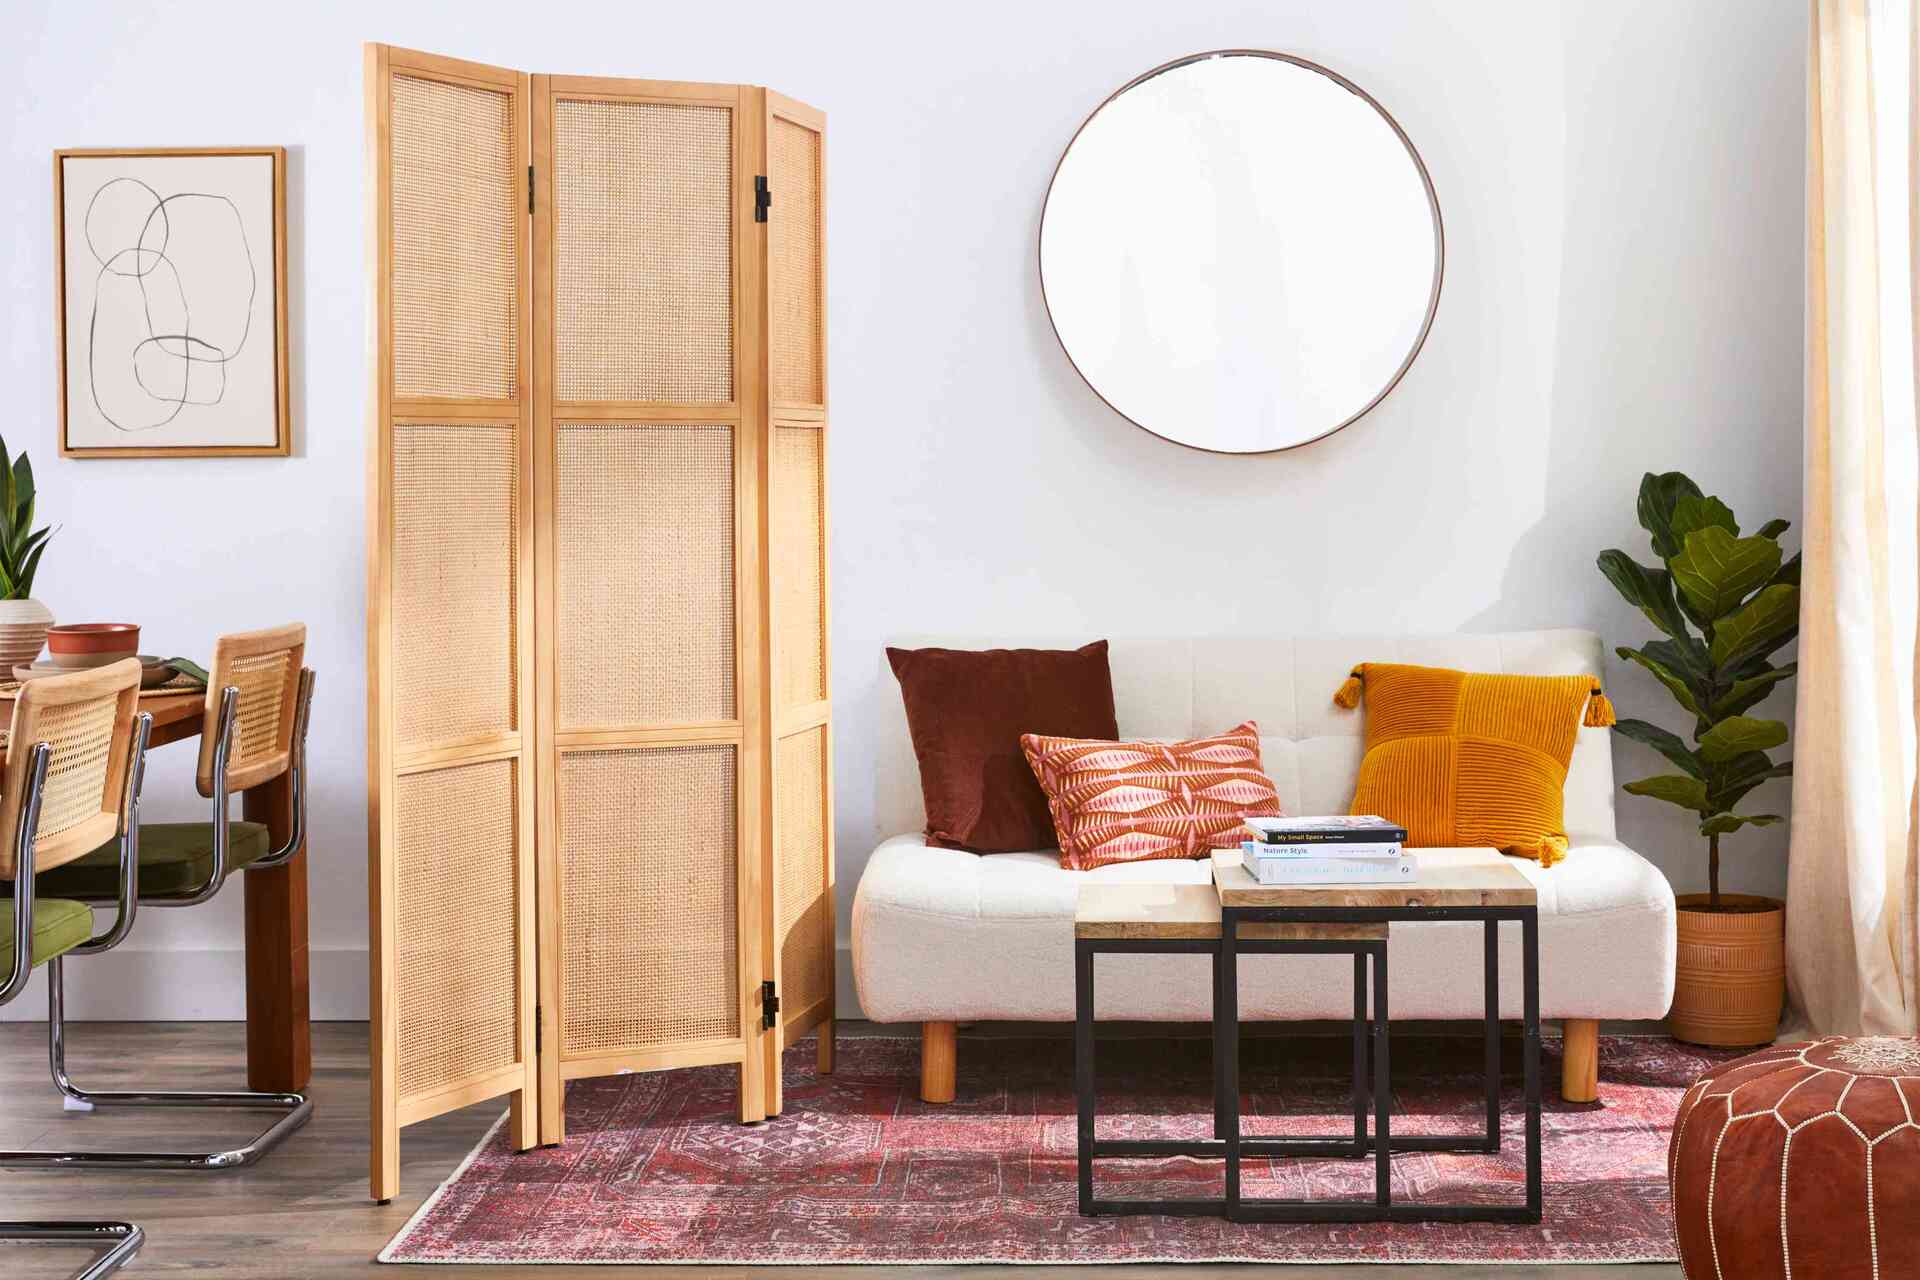 Living Room Divider Ideas: 9 Creative Ways To Divide Your Room